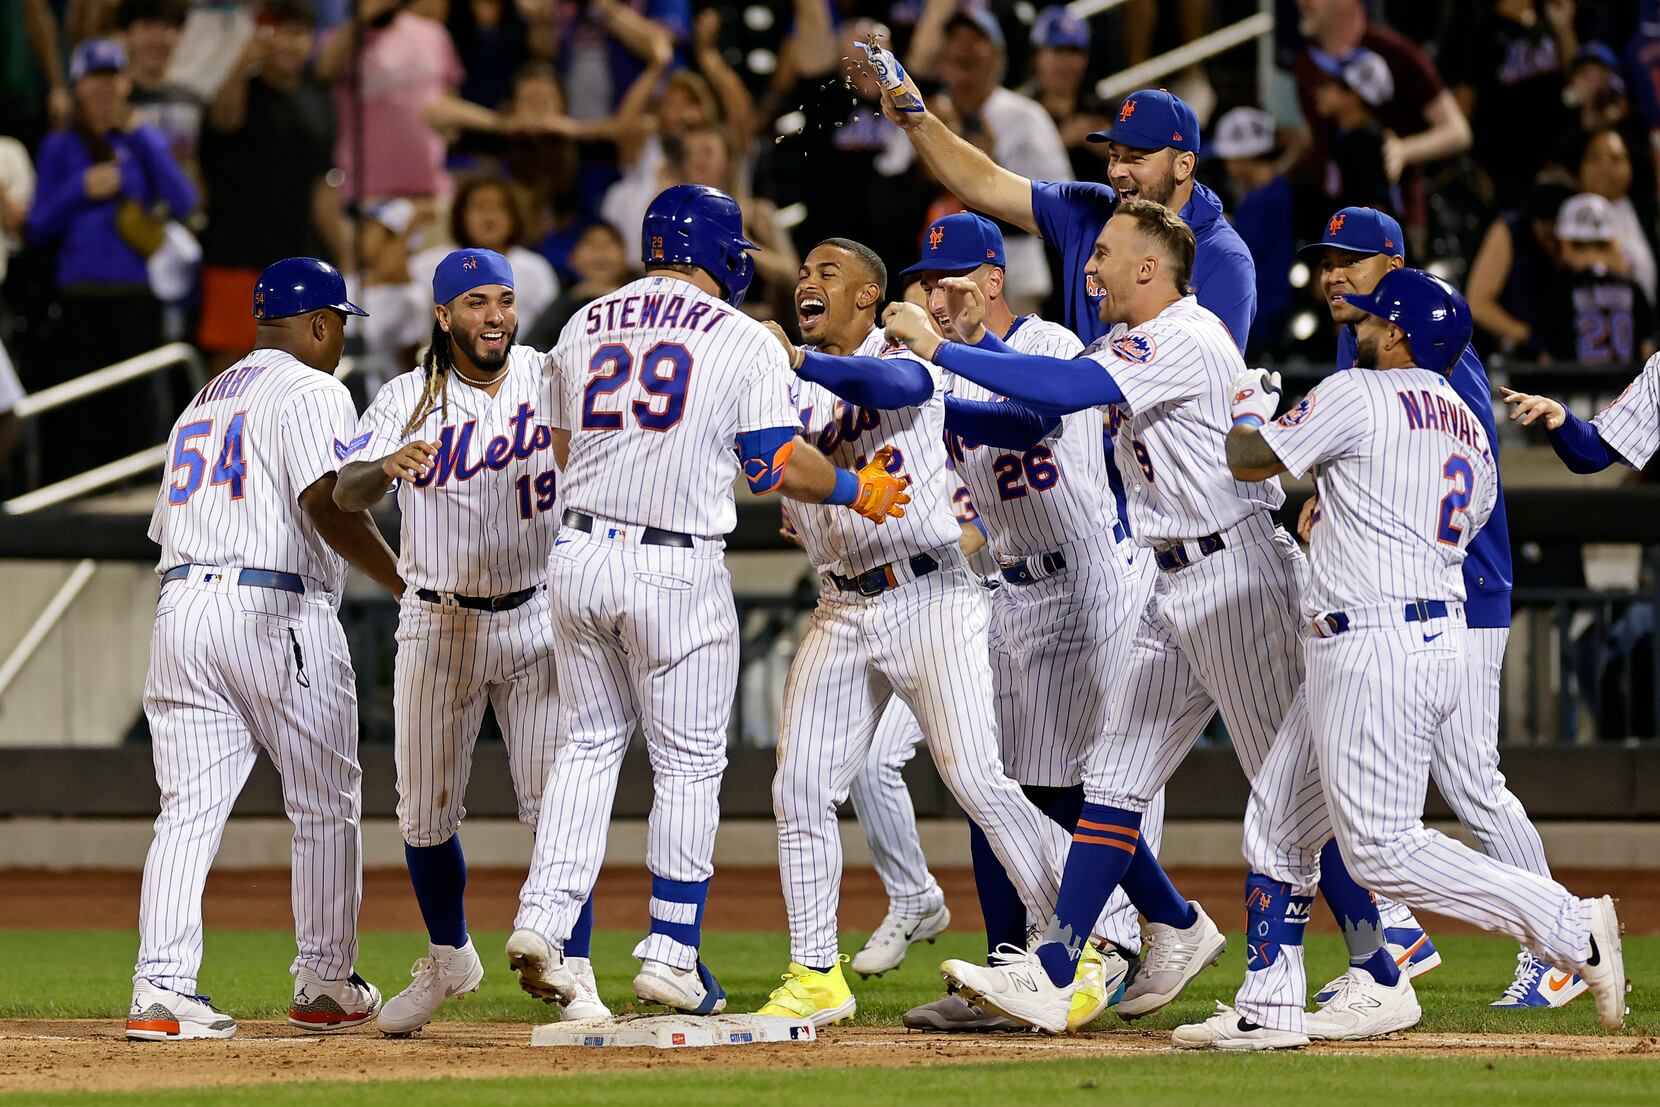 The Game 6 the world forgot, but Mets fans never will